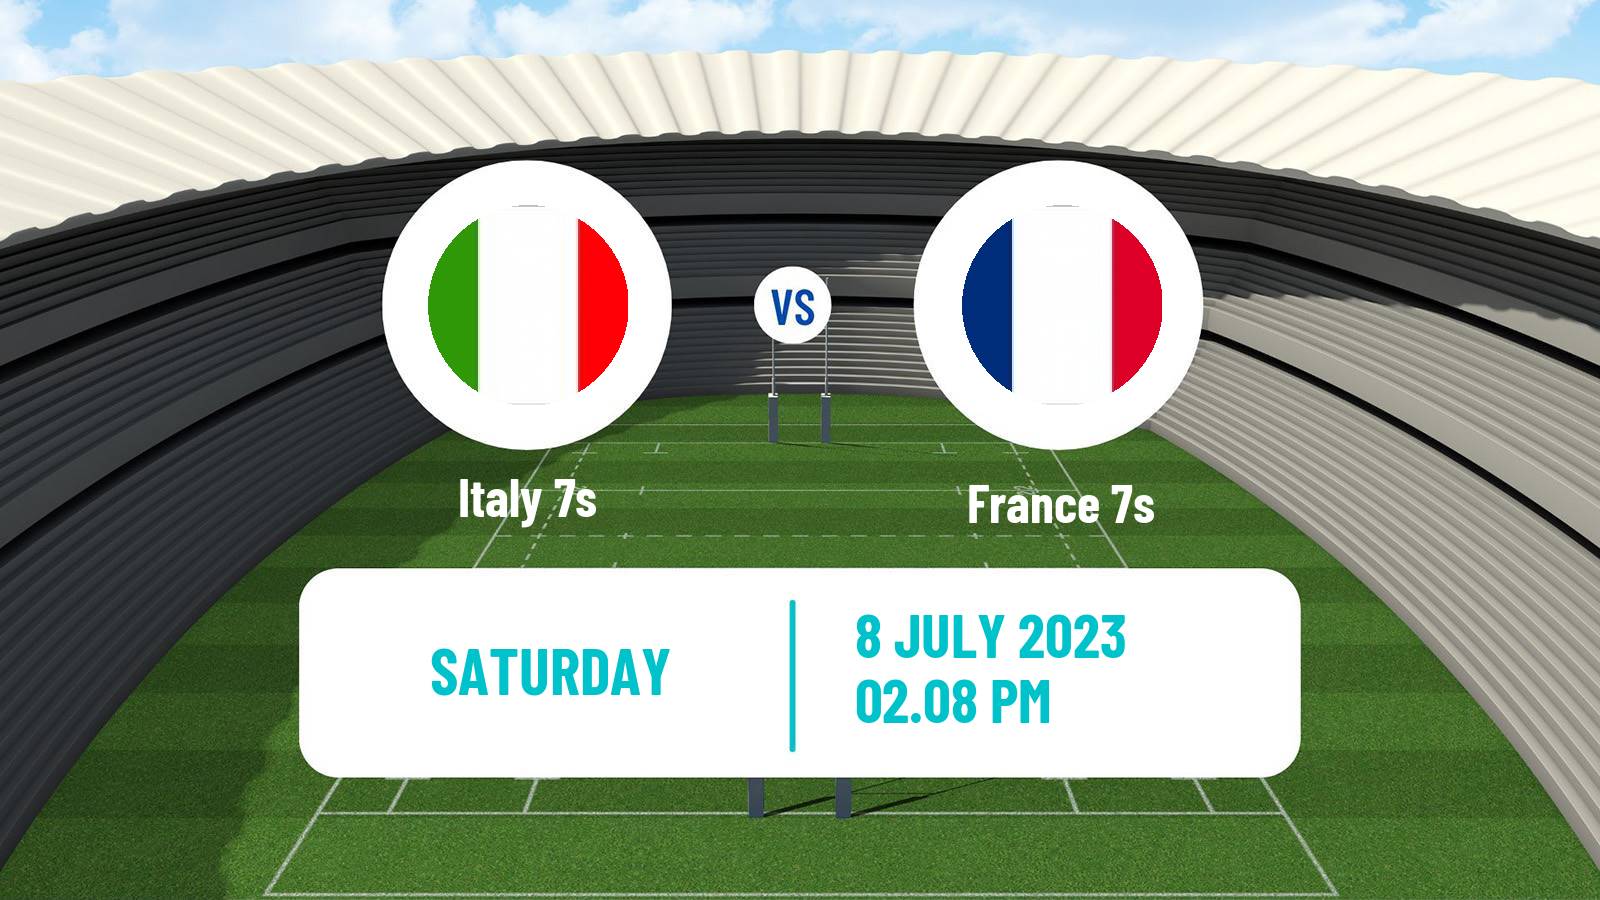 Rugby union Sevens Europe Series - Germany Italy 7s - France 7s